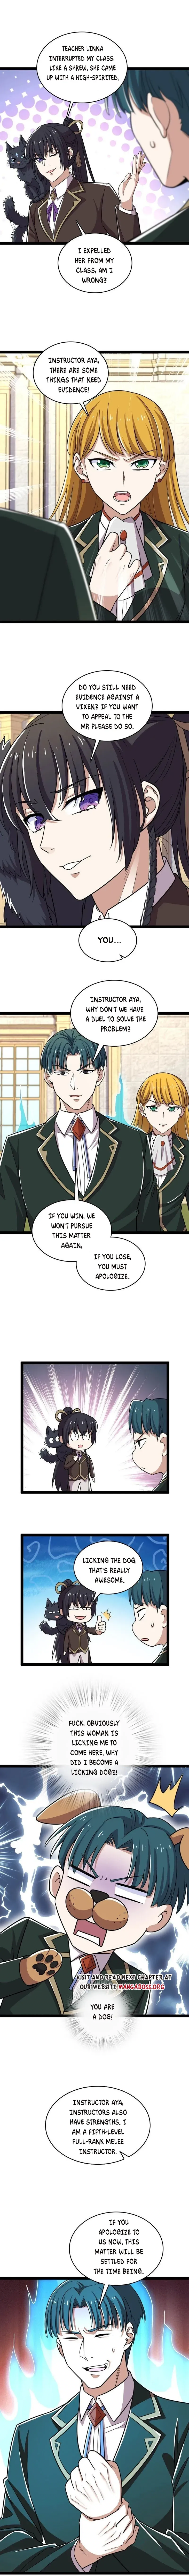 Life of a War Emperor After Retirement Chapter 236 page 6